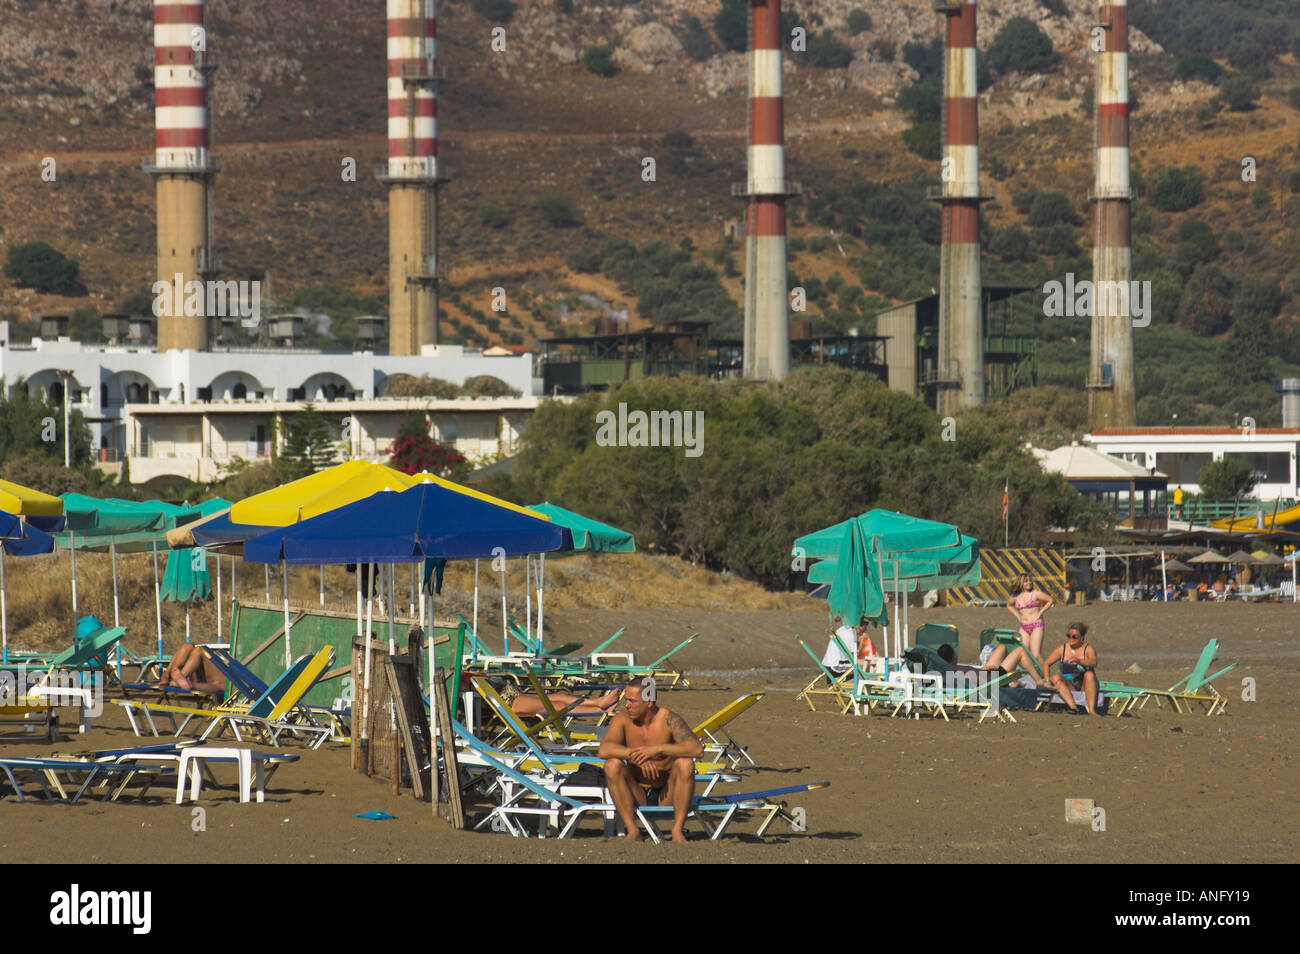 Greece Crete Ammoudara people at the beach with umbrelas and power plant chimneys in bkgd Stock Photo